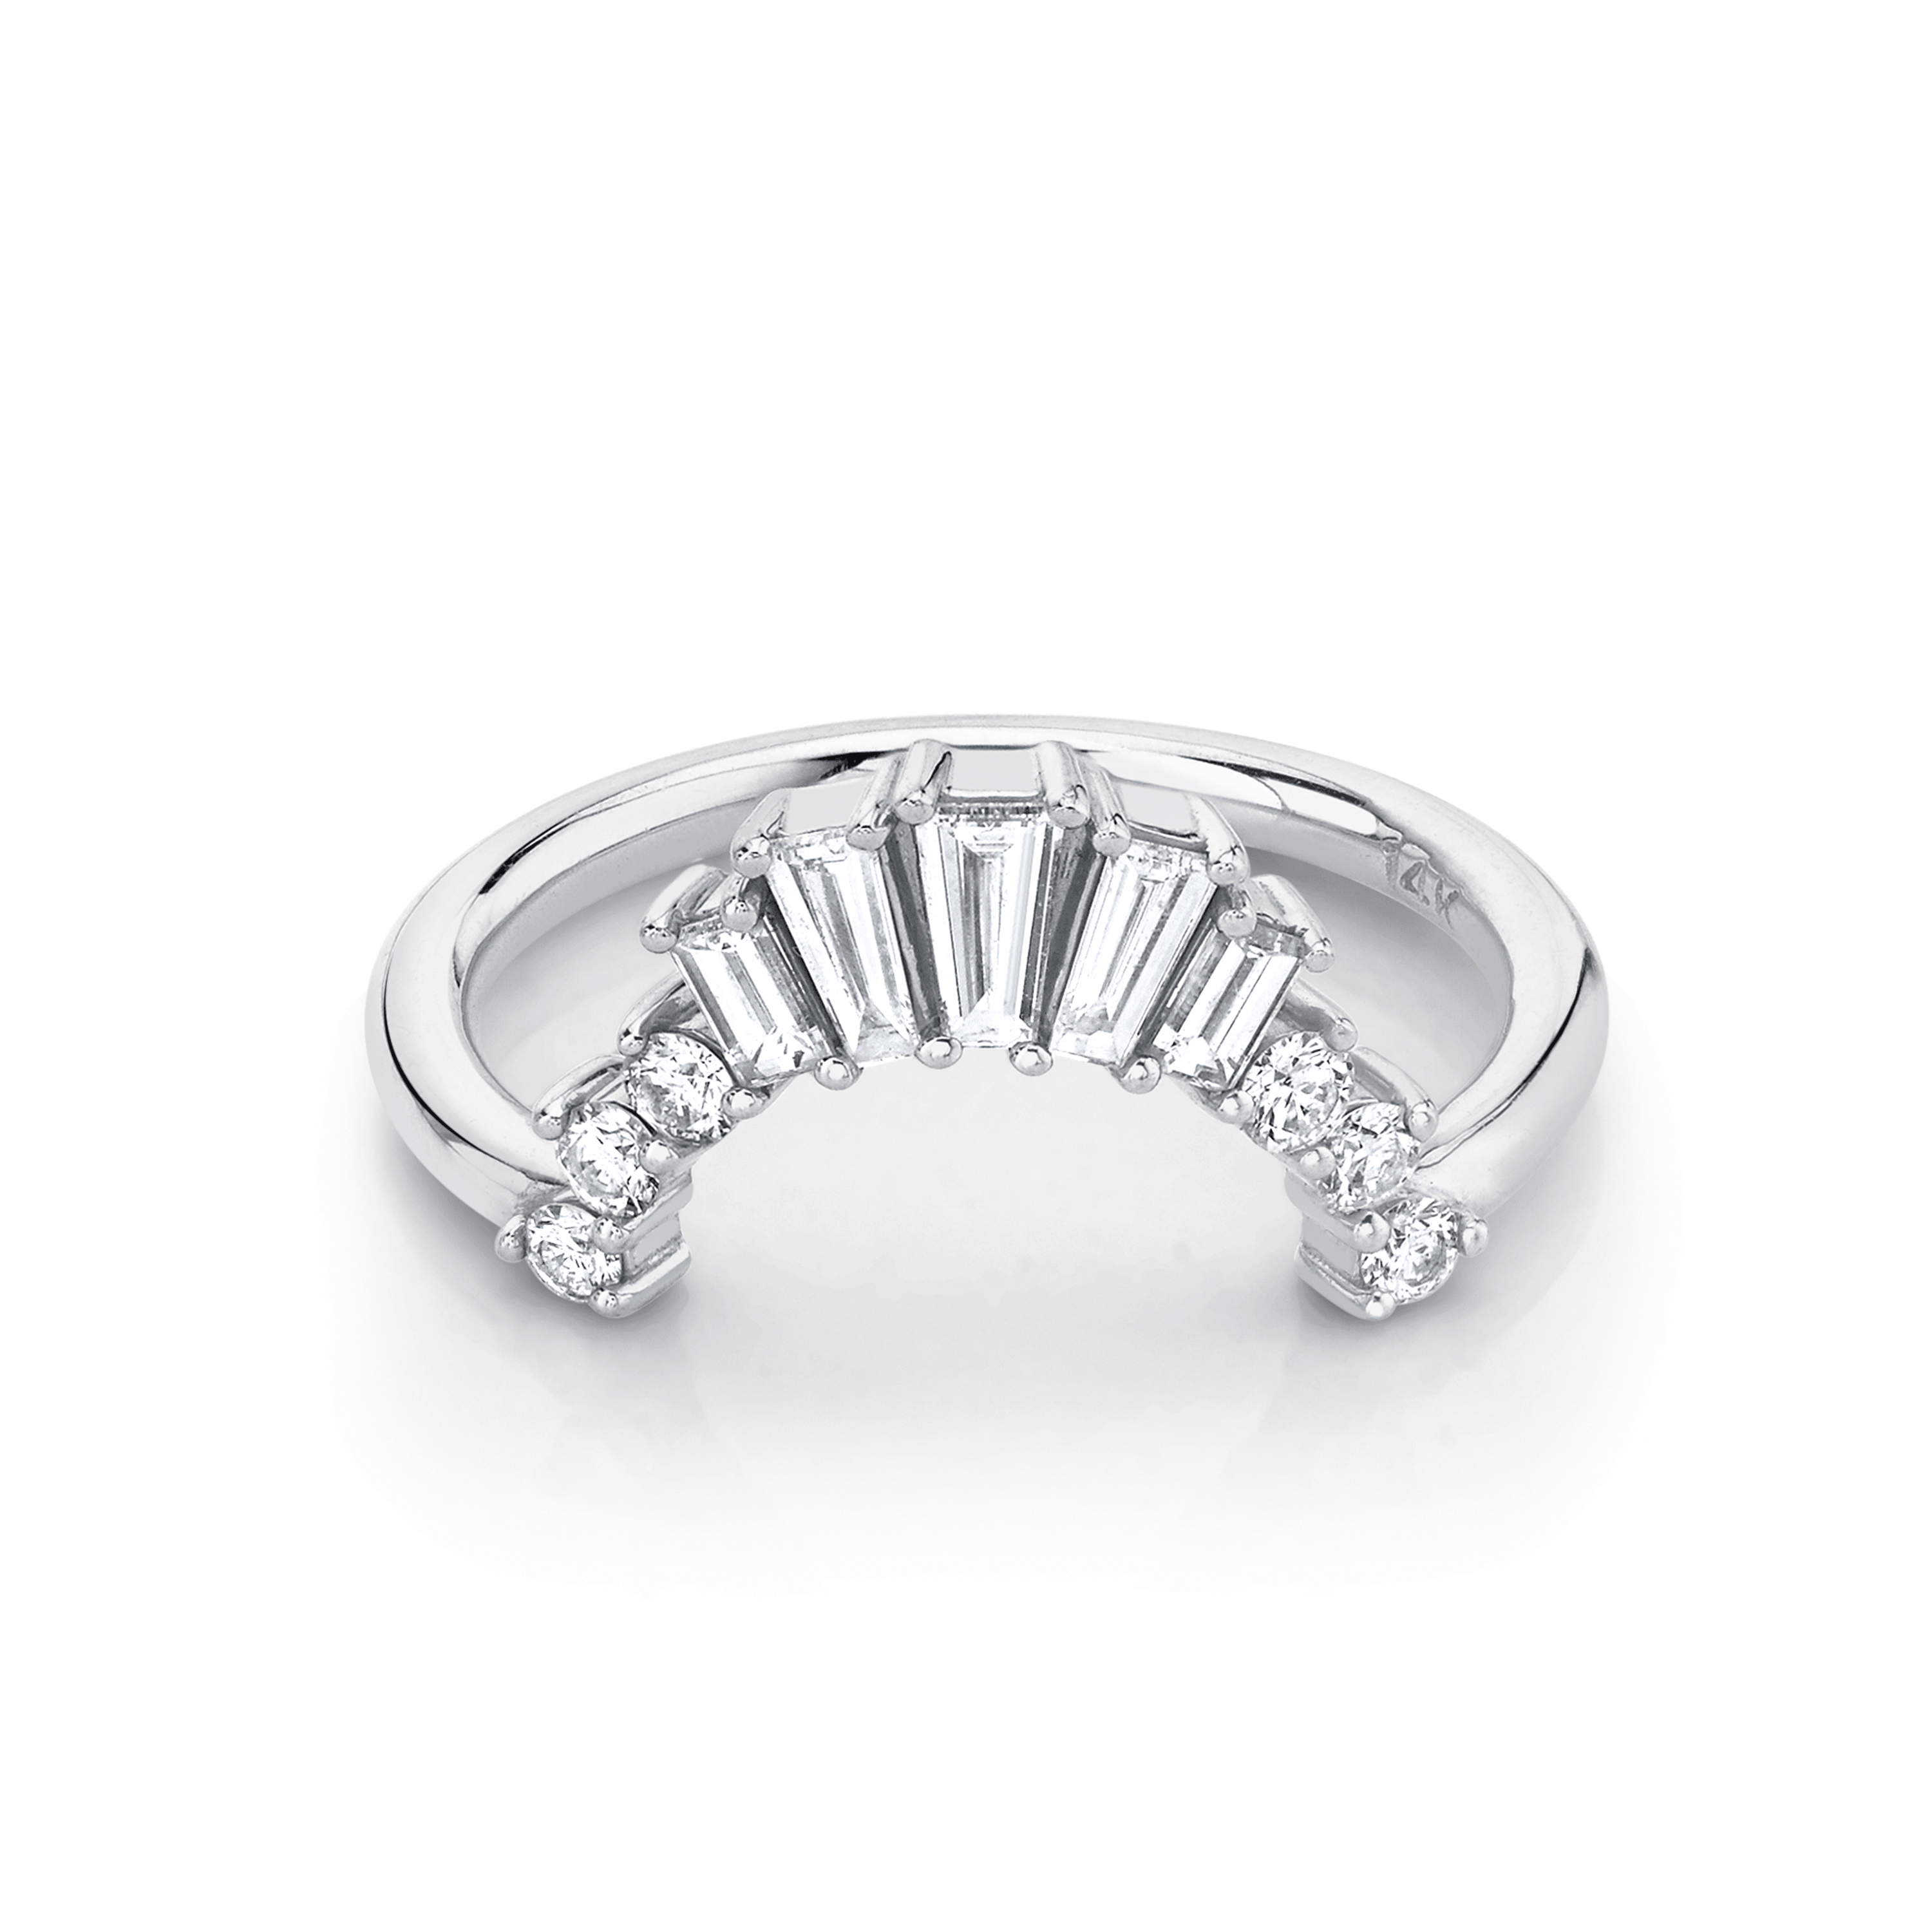 Marrow Fine Jewelry White Diamond Baguette And Round Art Deco Stacking Wedding Band